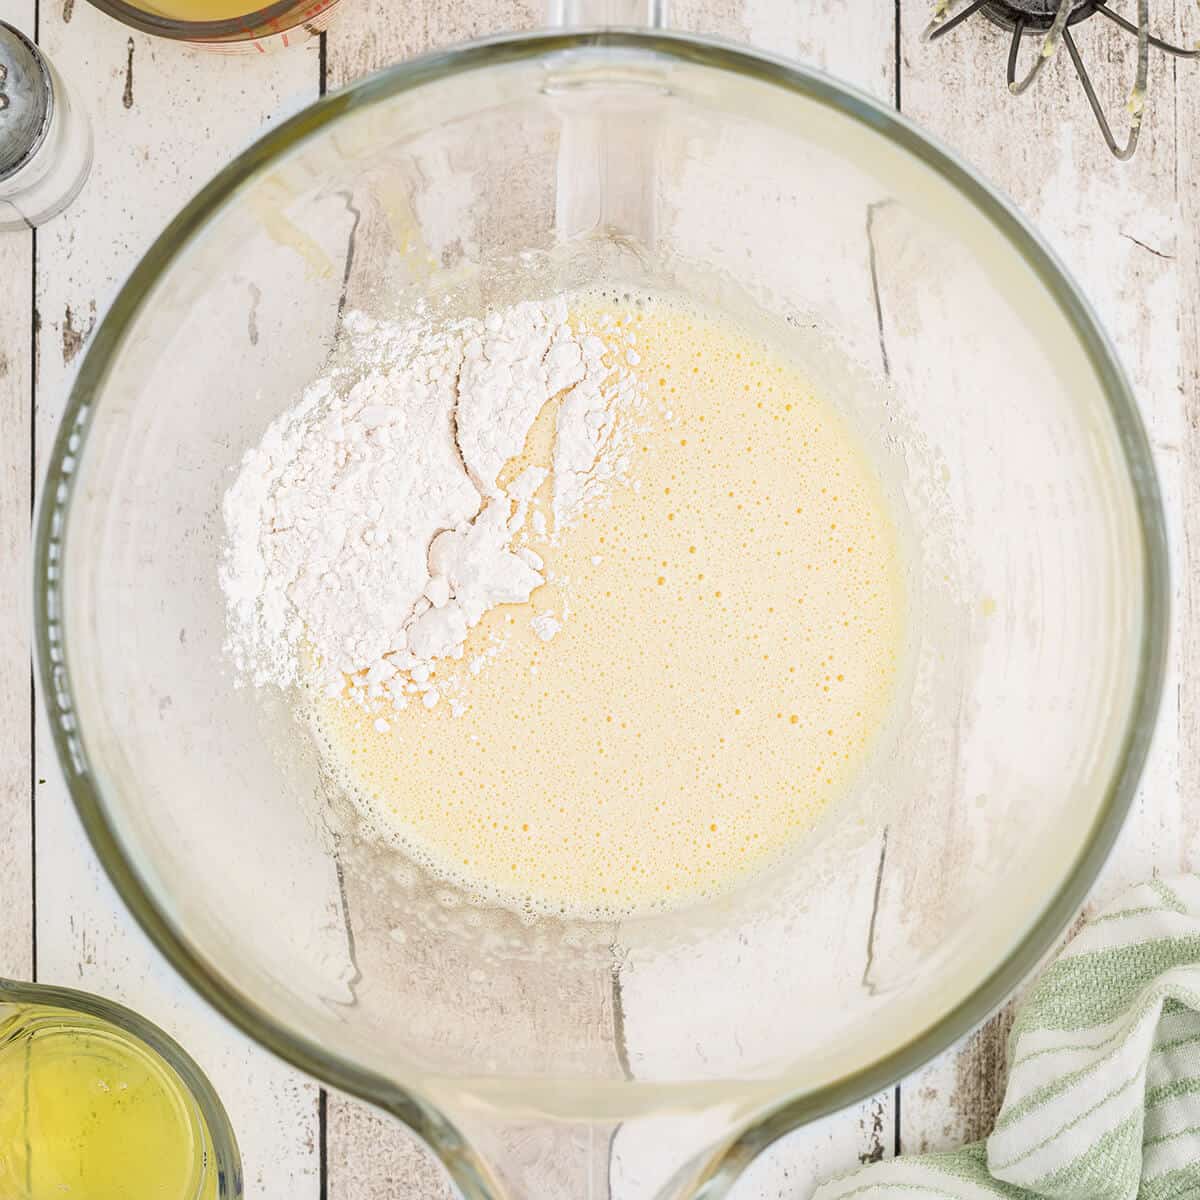 Add flour to cake batter in a glass bowl.